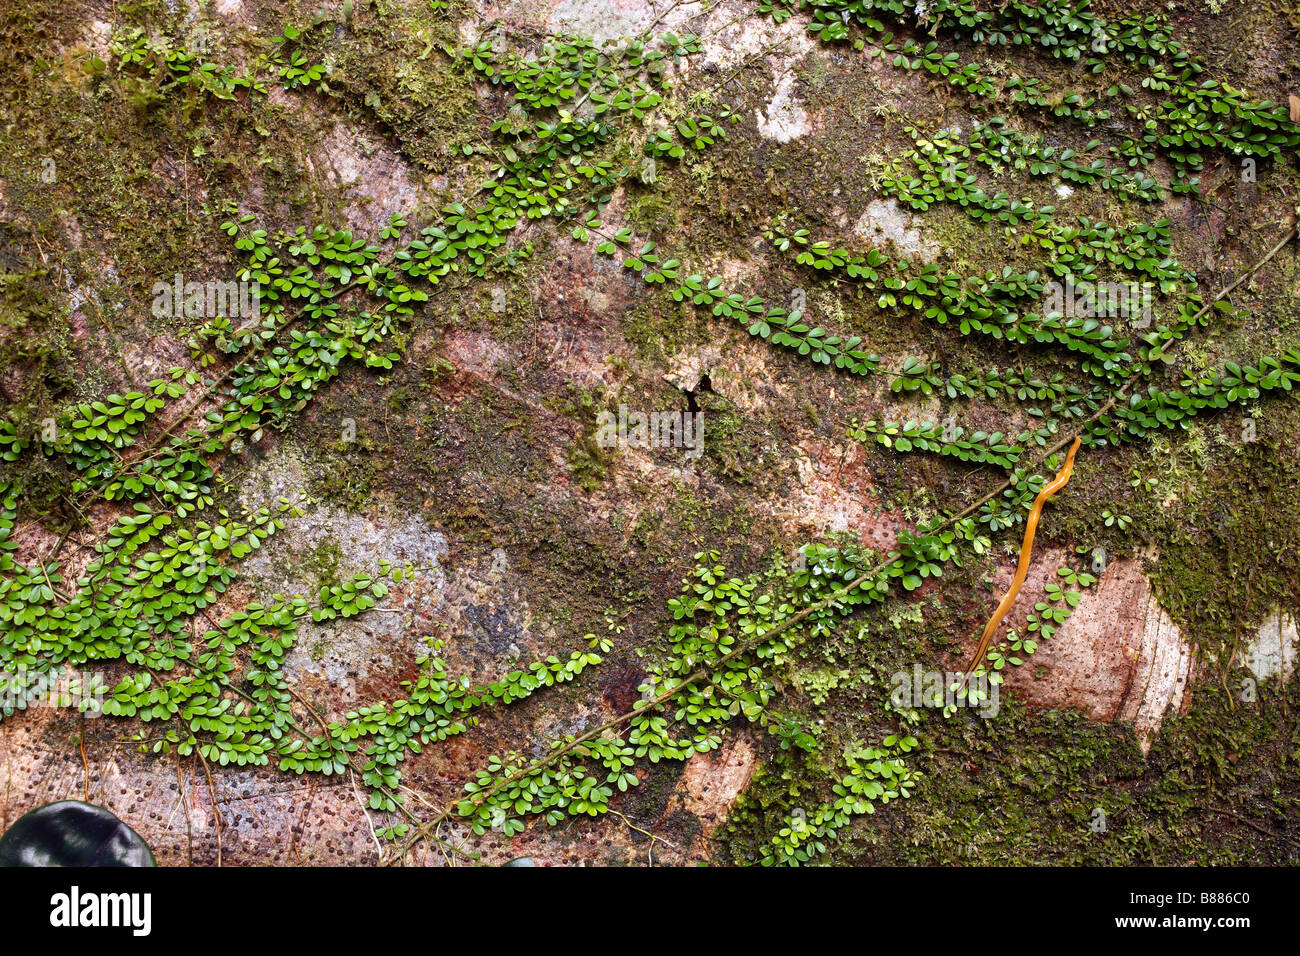 Climbing plant on a buttress root of a rainforest tree with giant land planarian on right Stock Photo